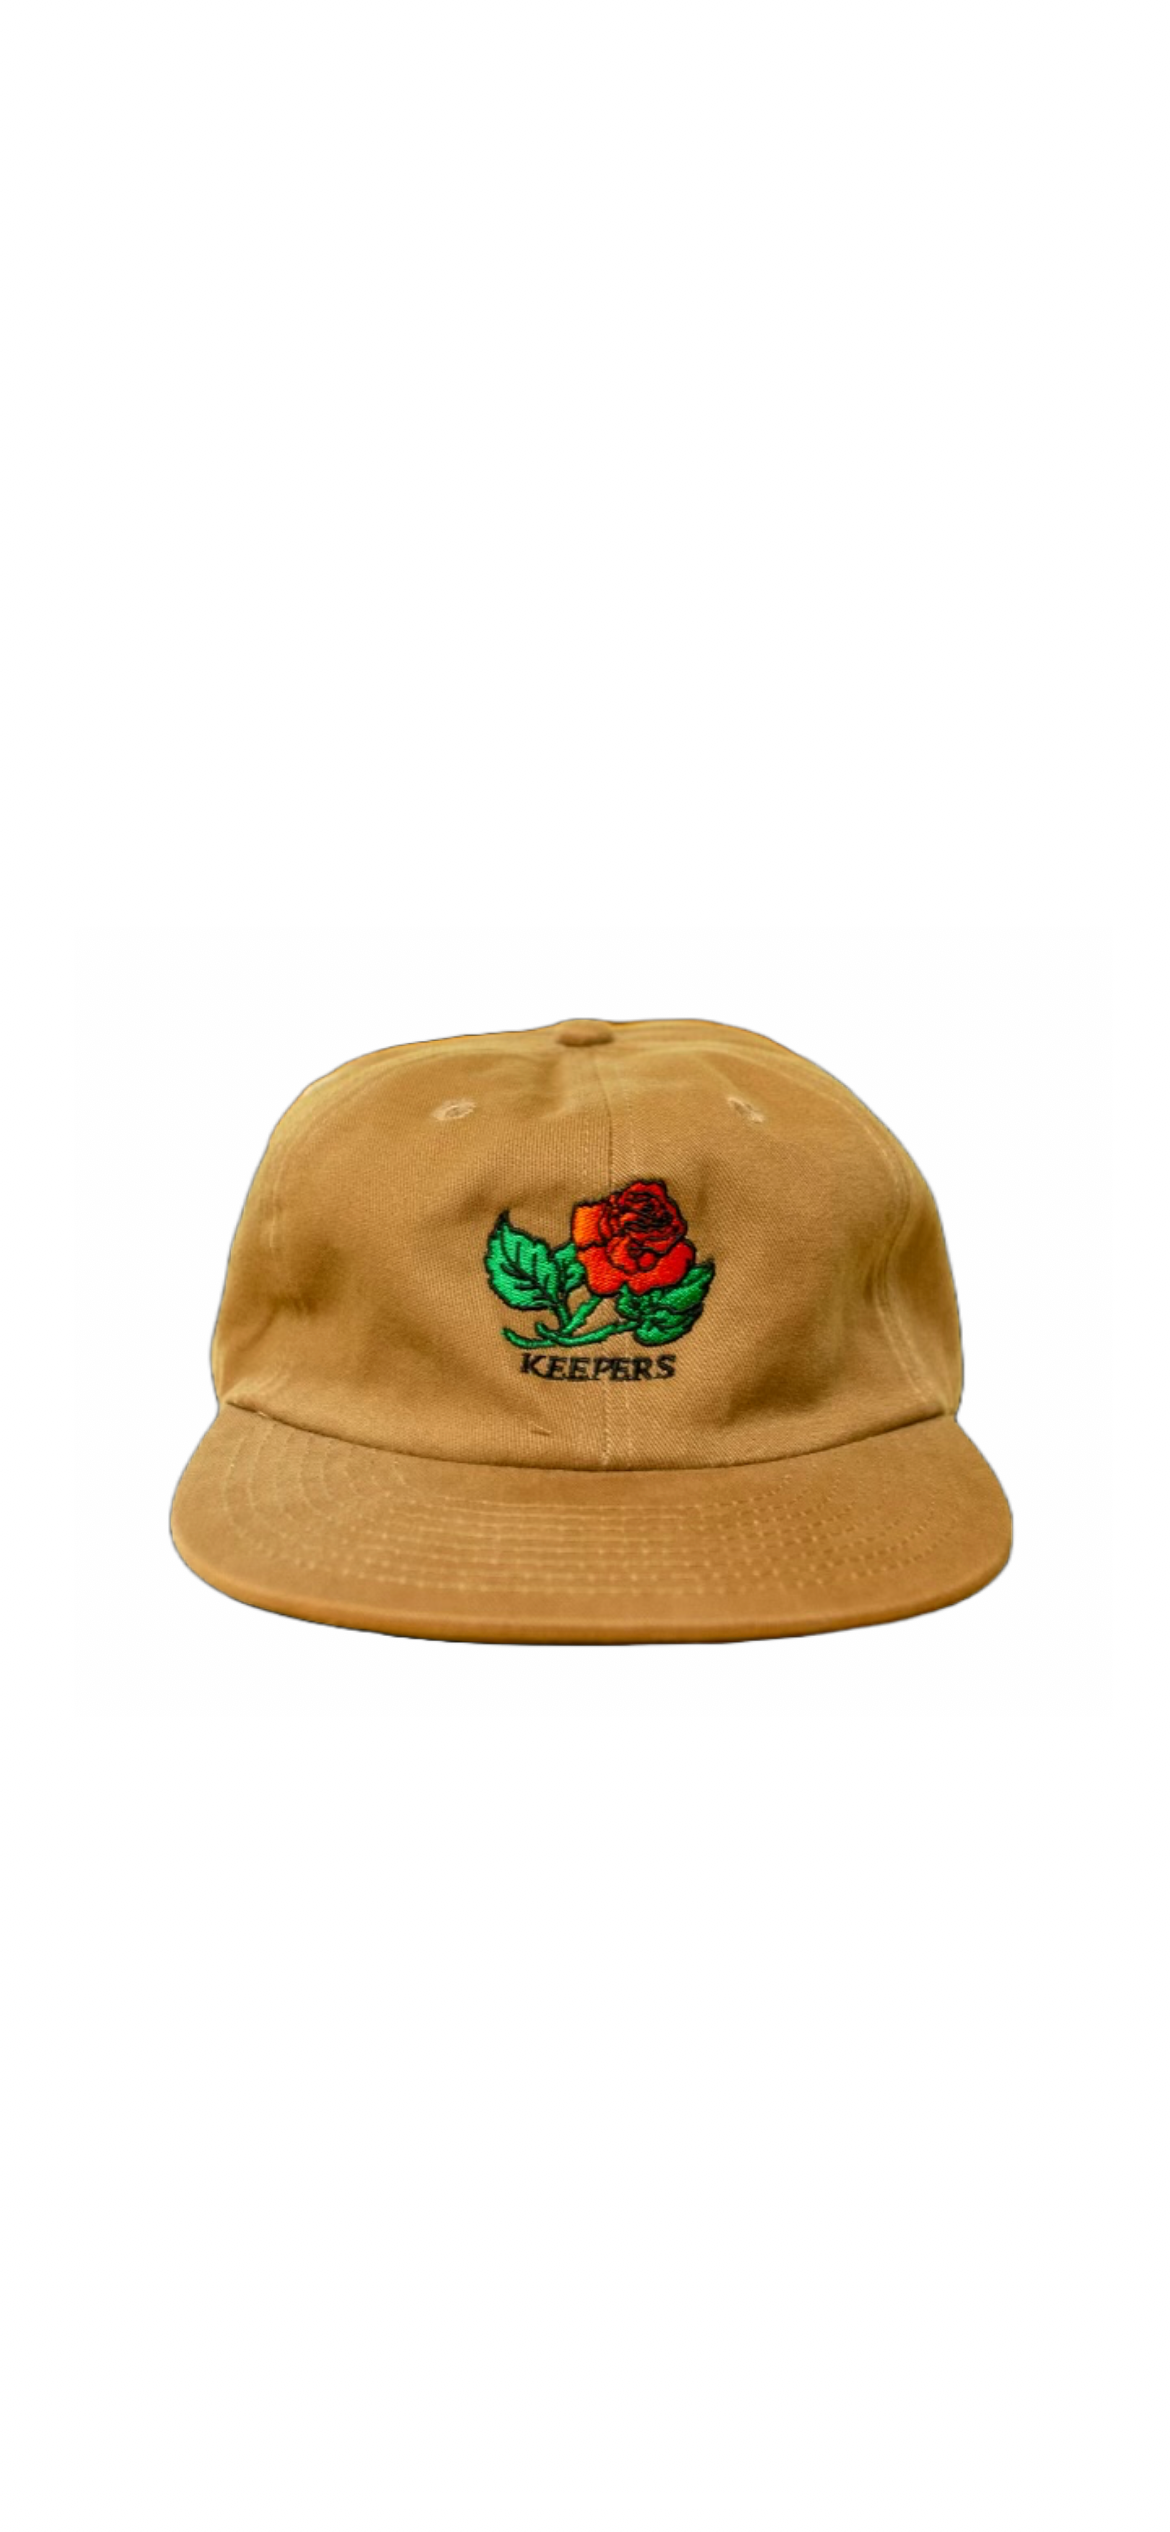 KEEPERS ROSE HAT